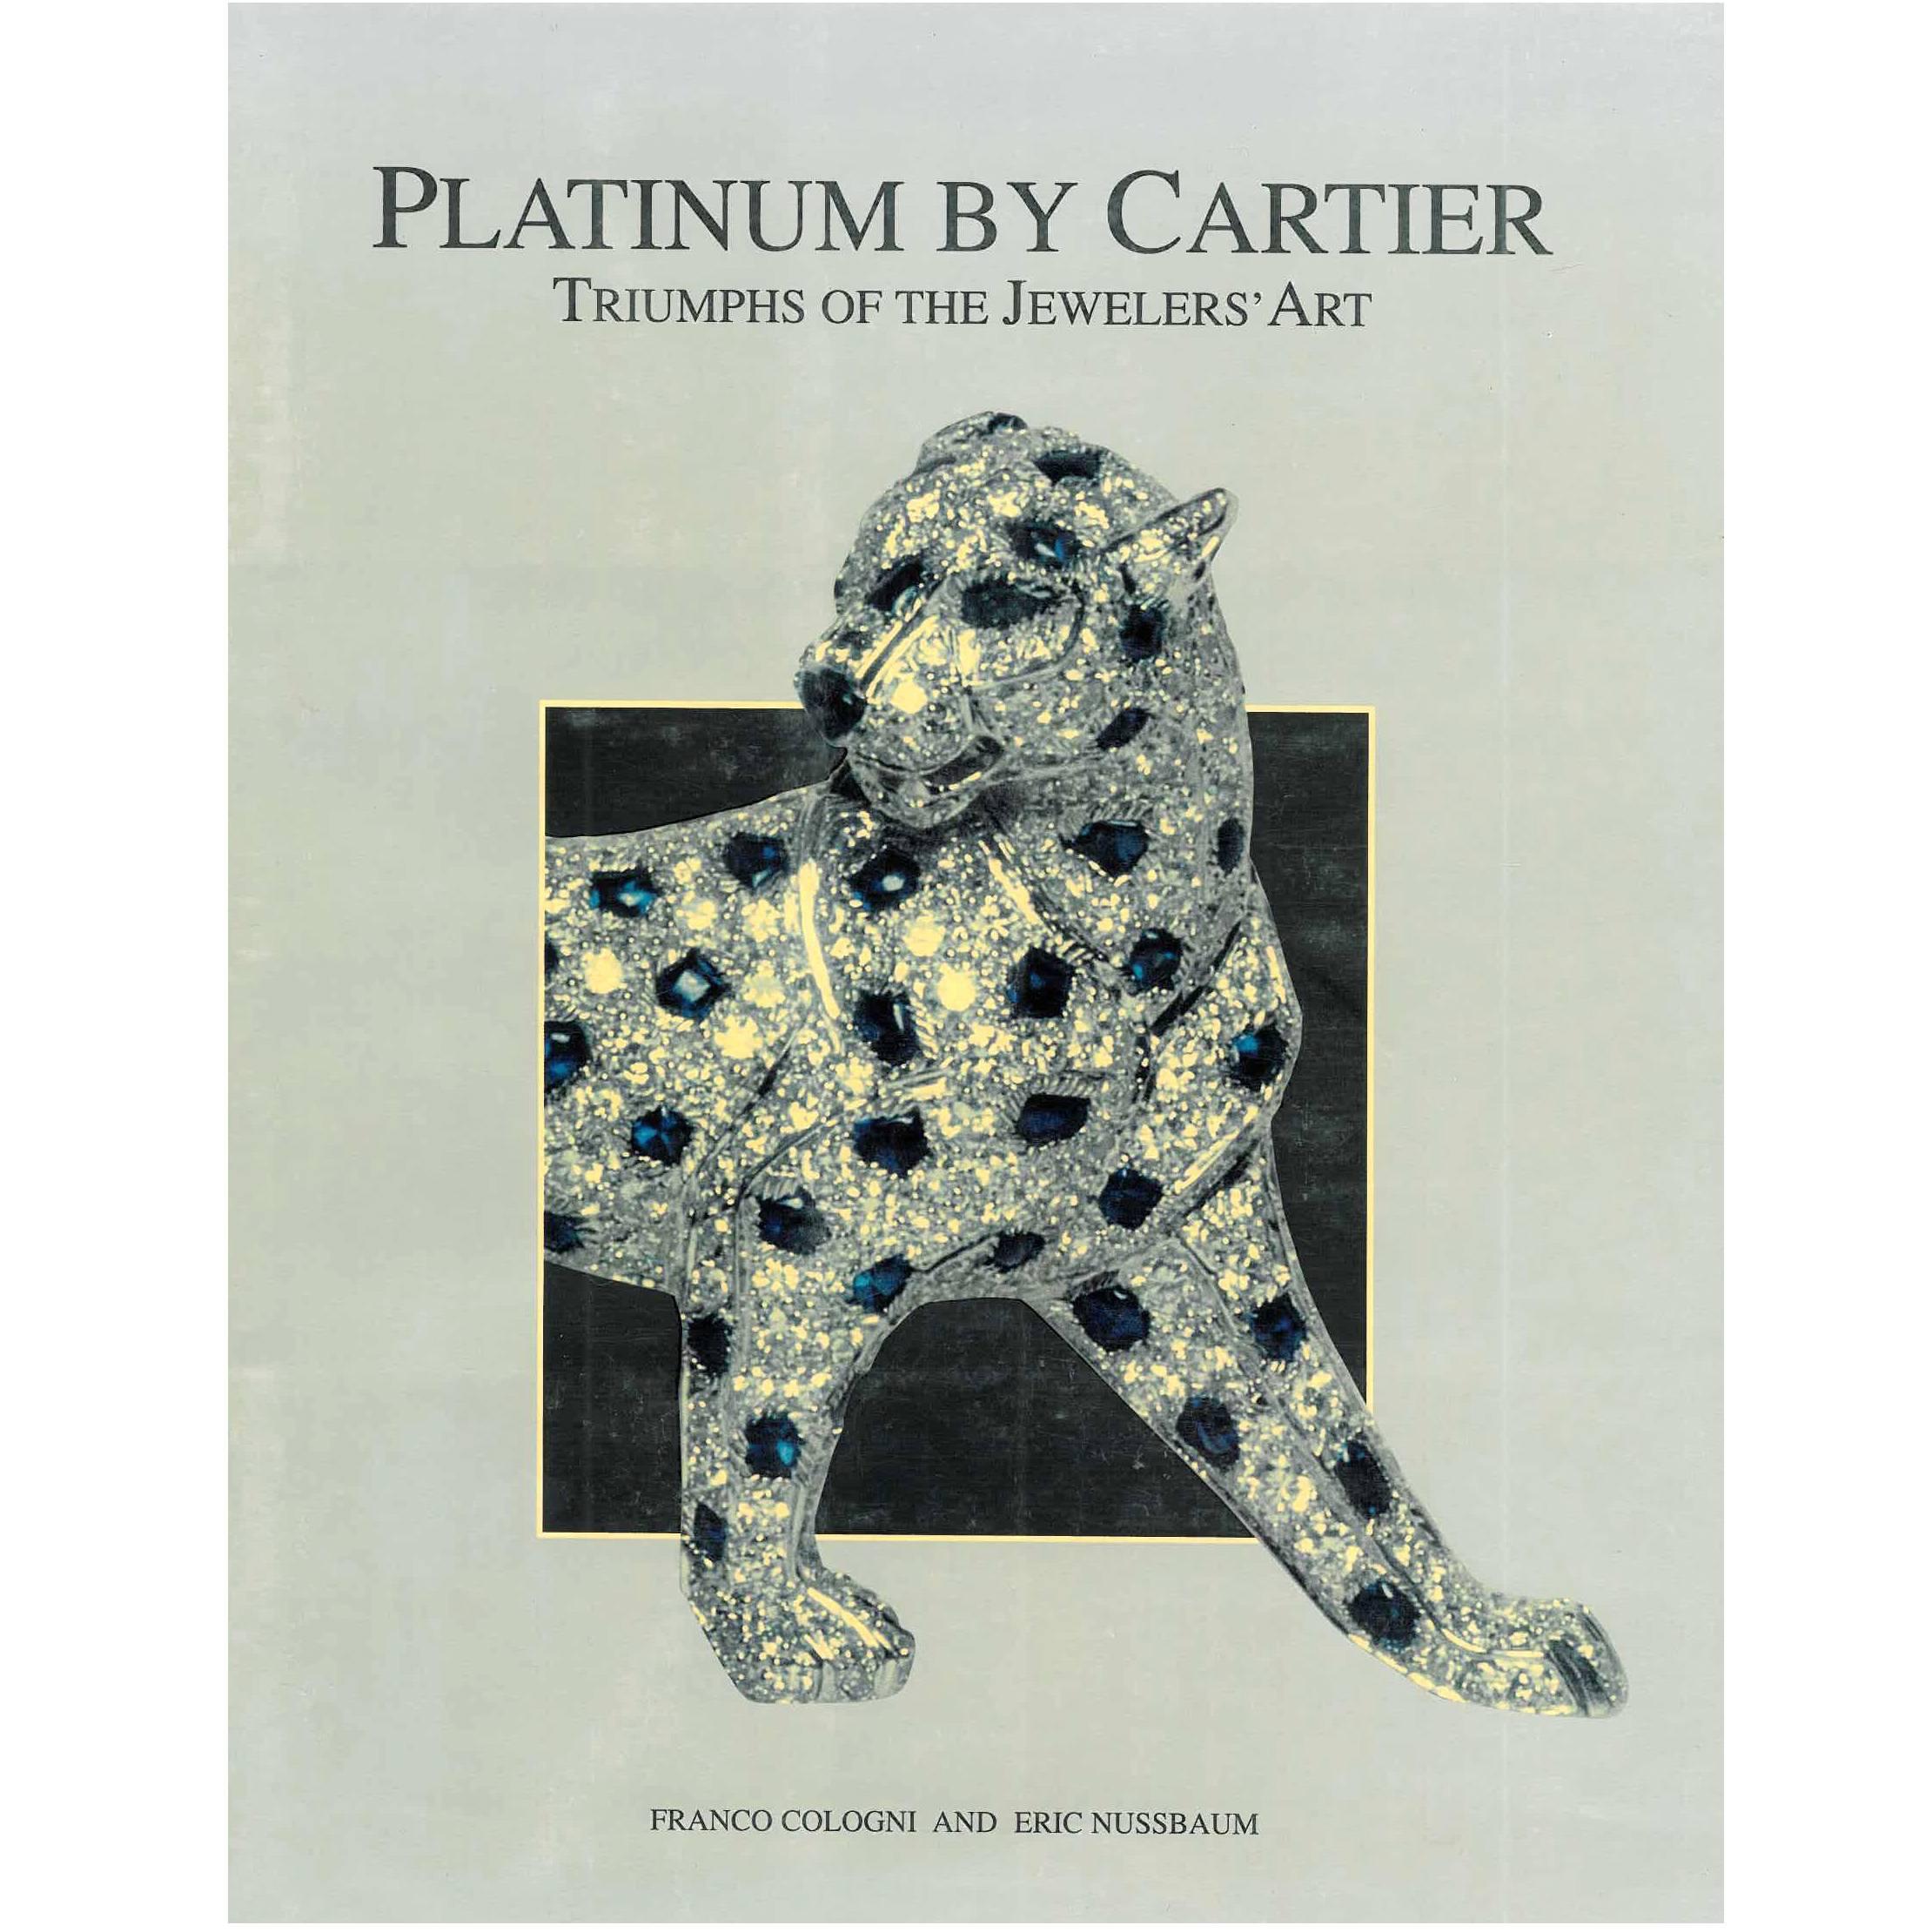 Book of Platinum by Cartier, Triumph of the Jewelers Art